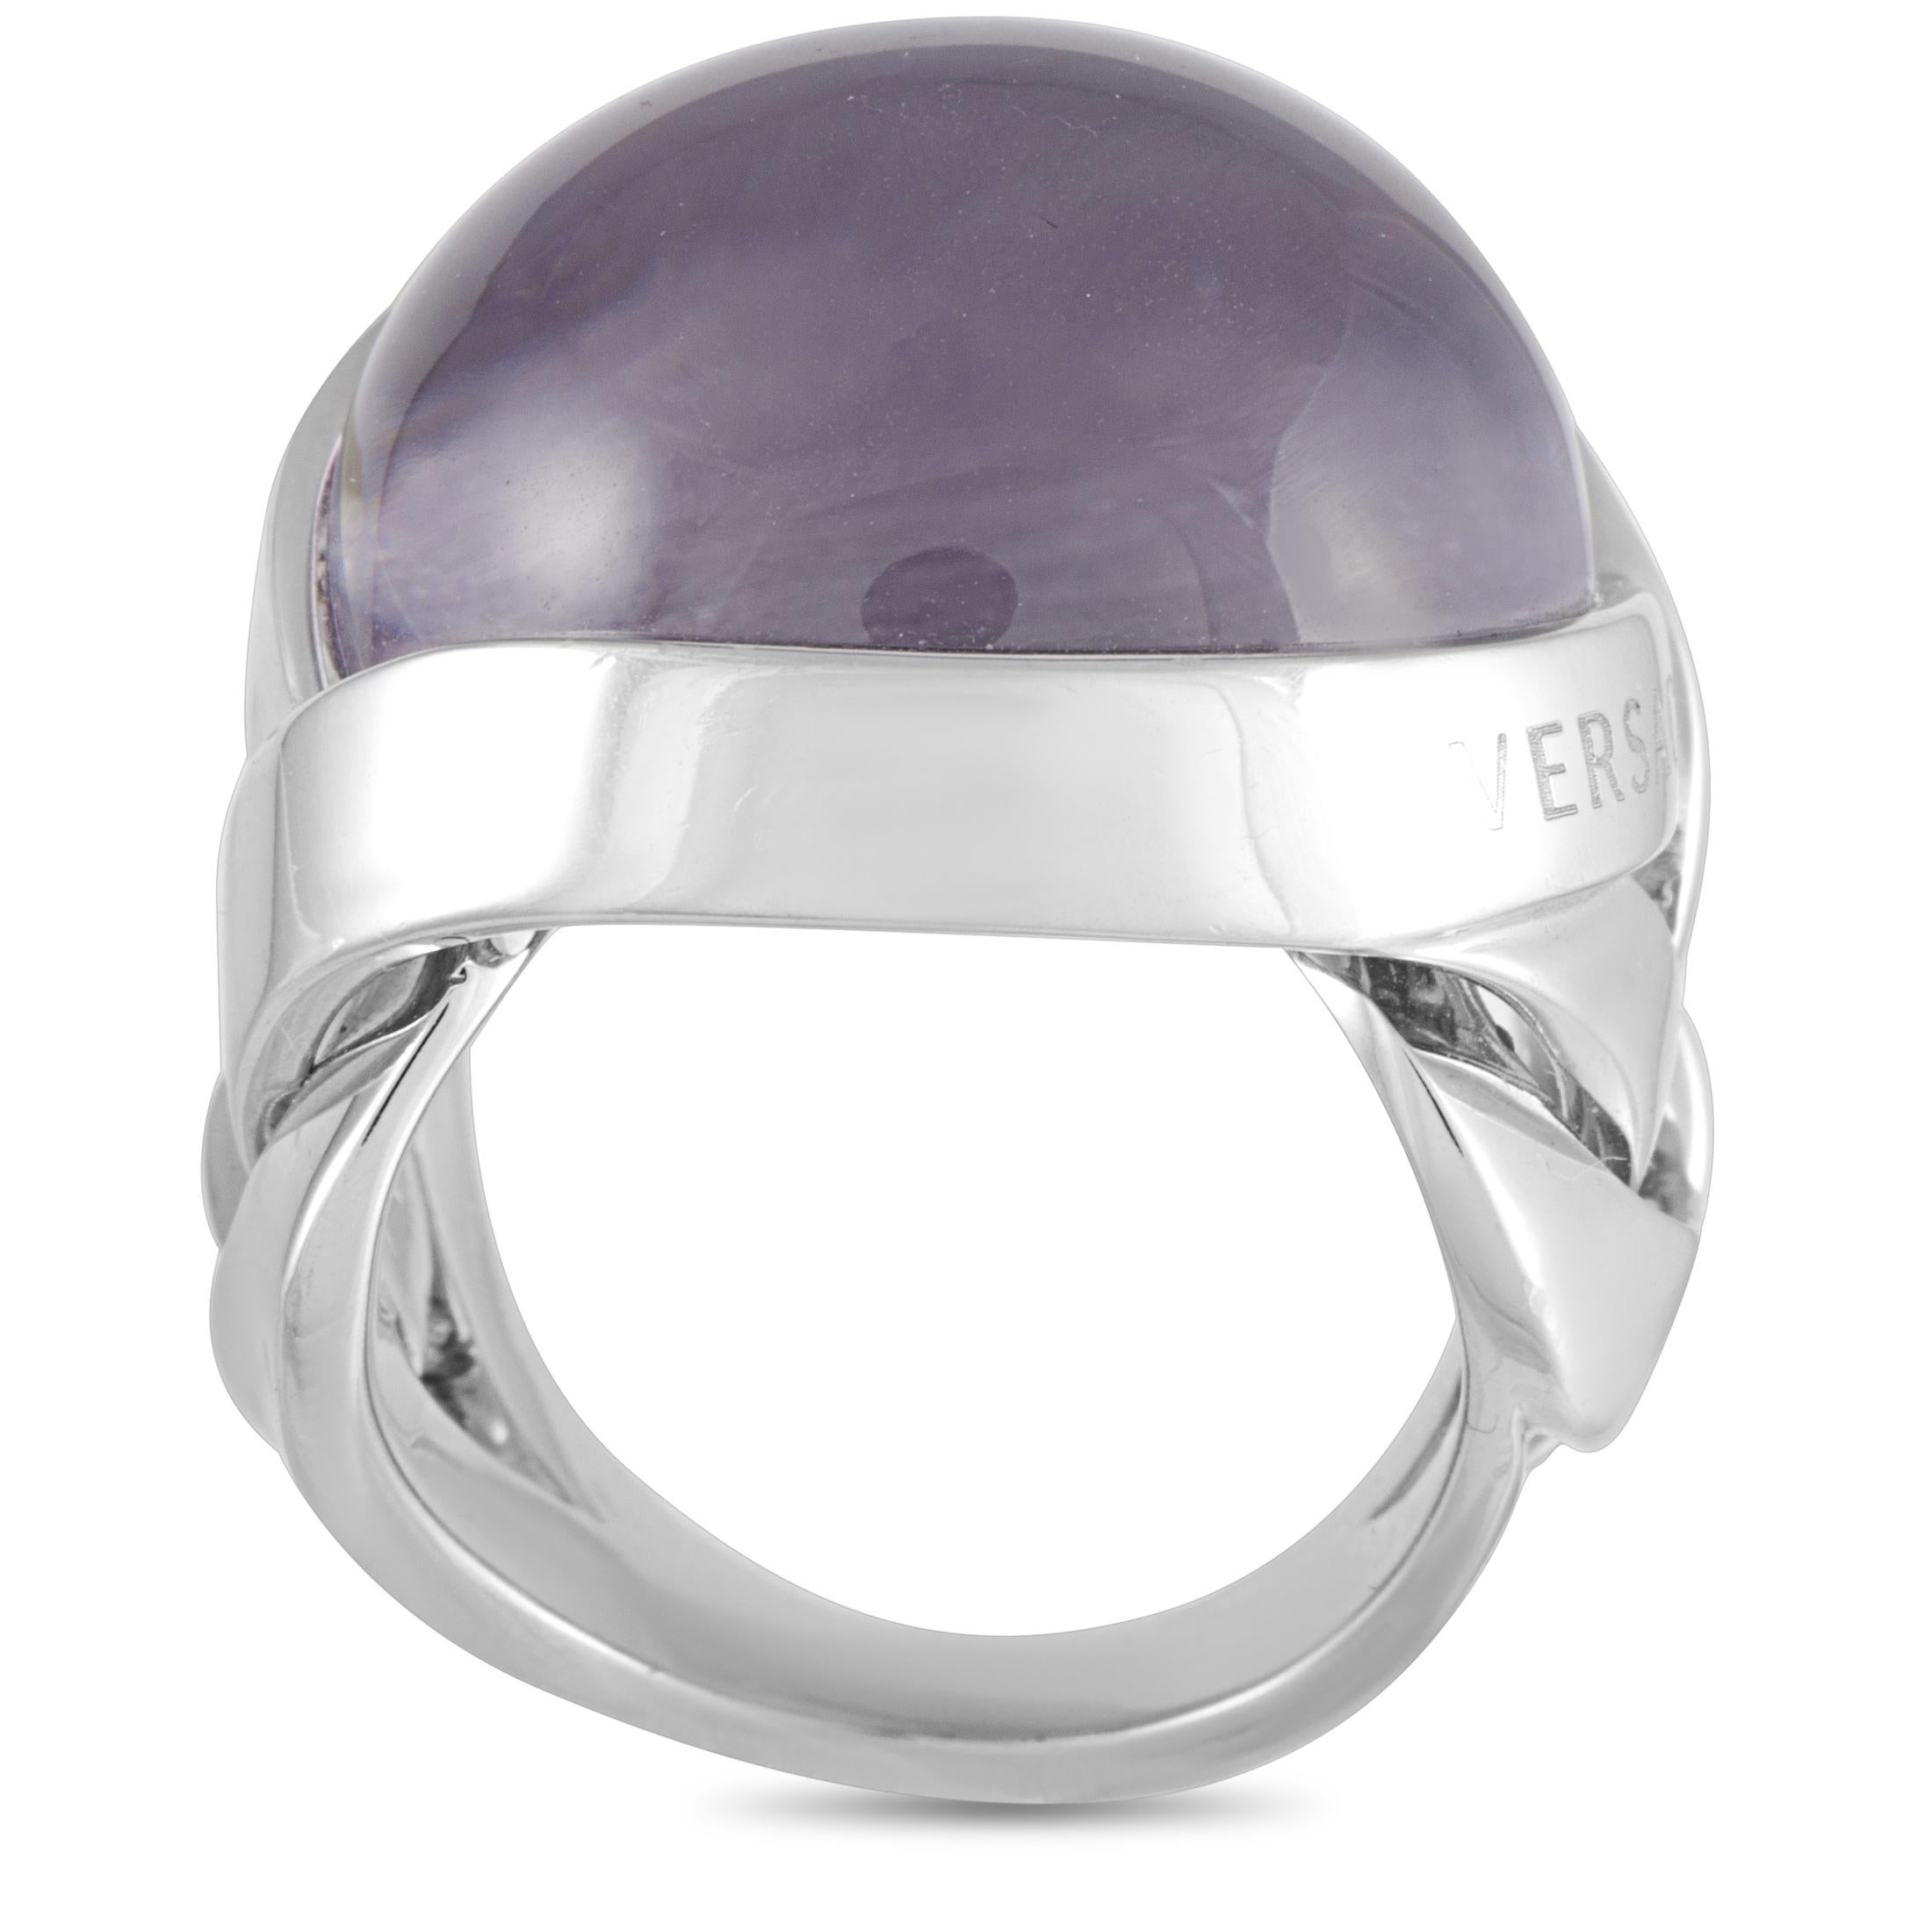 This Versace ring is crafted from 18K white gold and set with an amethyst. The ring weighs 28 grams, boasting band thickness of 17 mm and top height of 11 mm, while top dimensions measure 23 by 23 mm.
 
 Offered in estate condition, this item